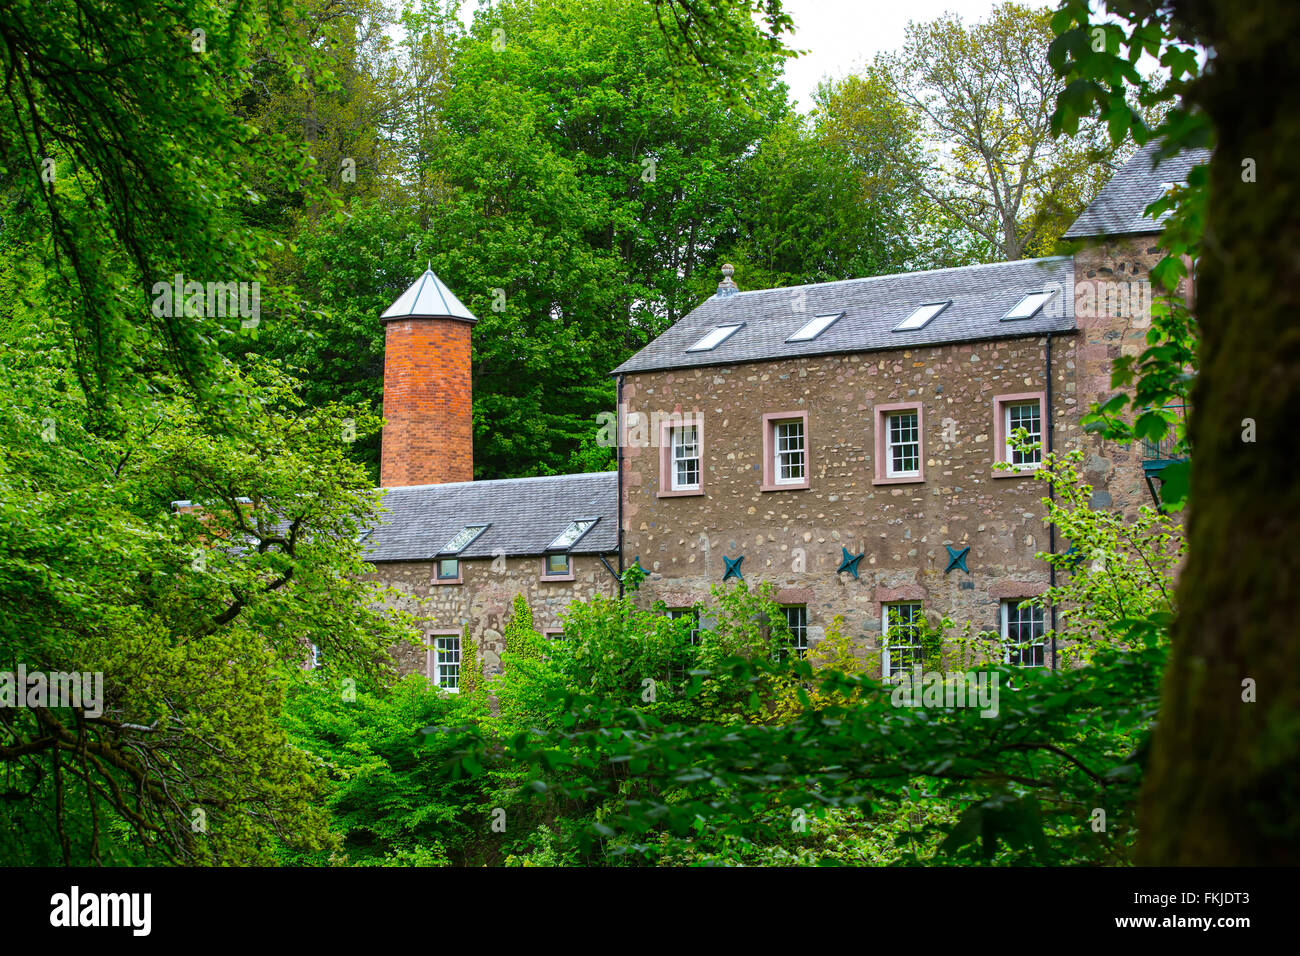 Old industrial water mill in the town of Blairgowrie, Perthshire, Scotland, UK Stock Photo